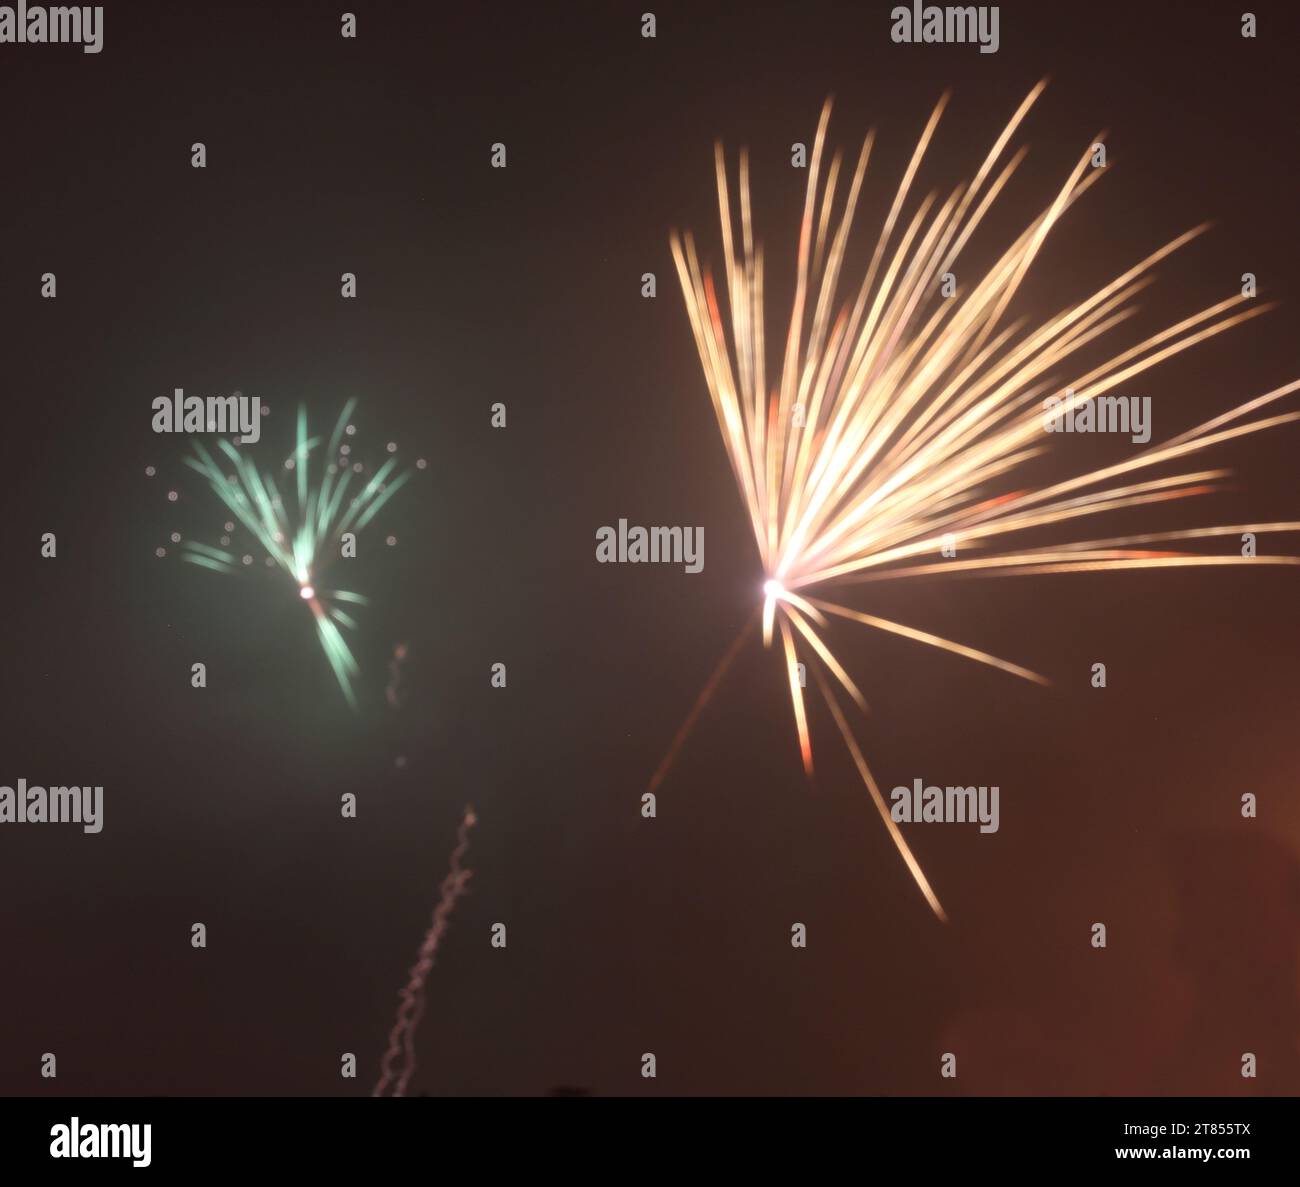 A fireworks display during the new year's Eve night lit up the night sky Stock Photo